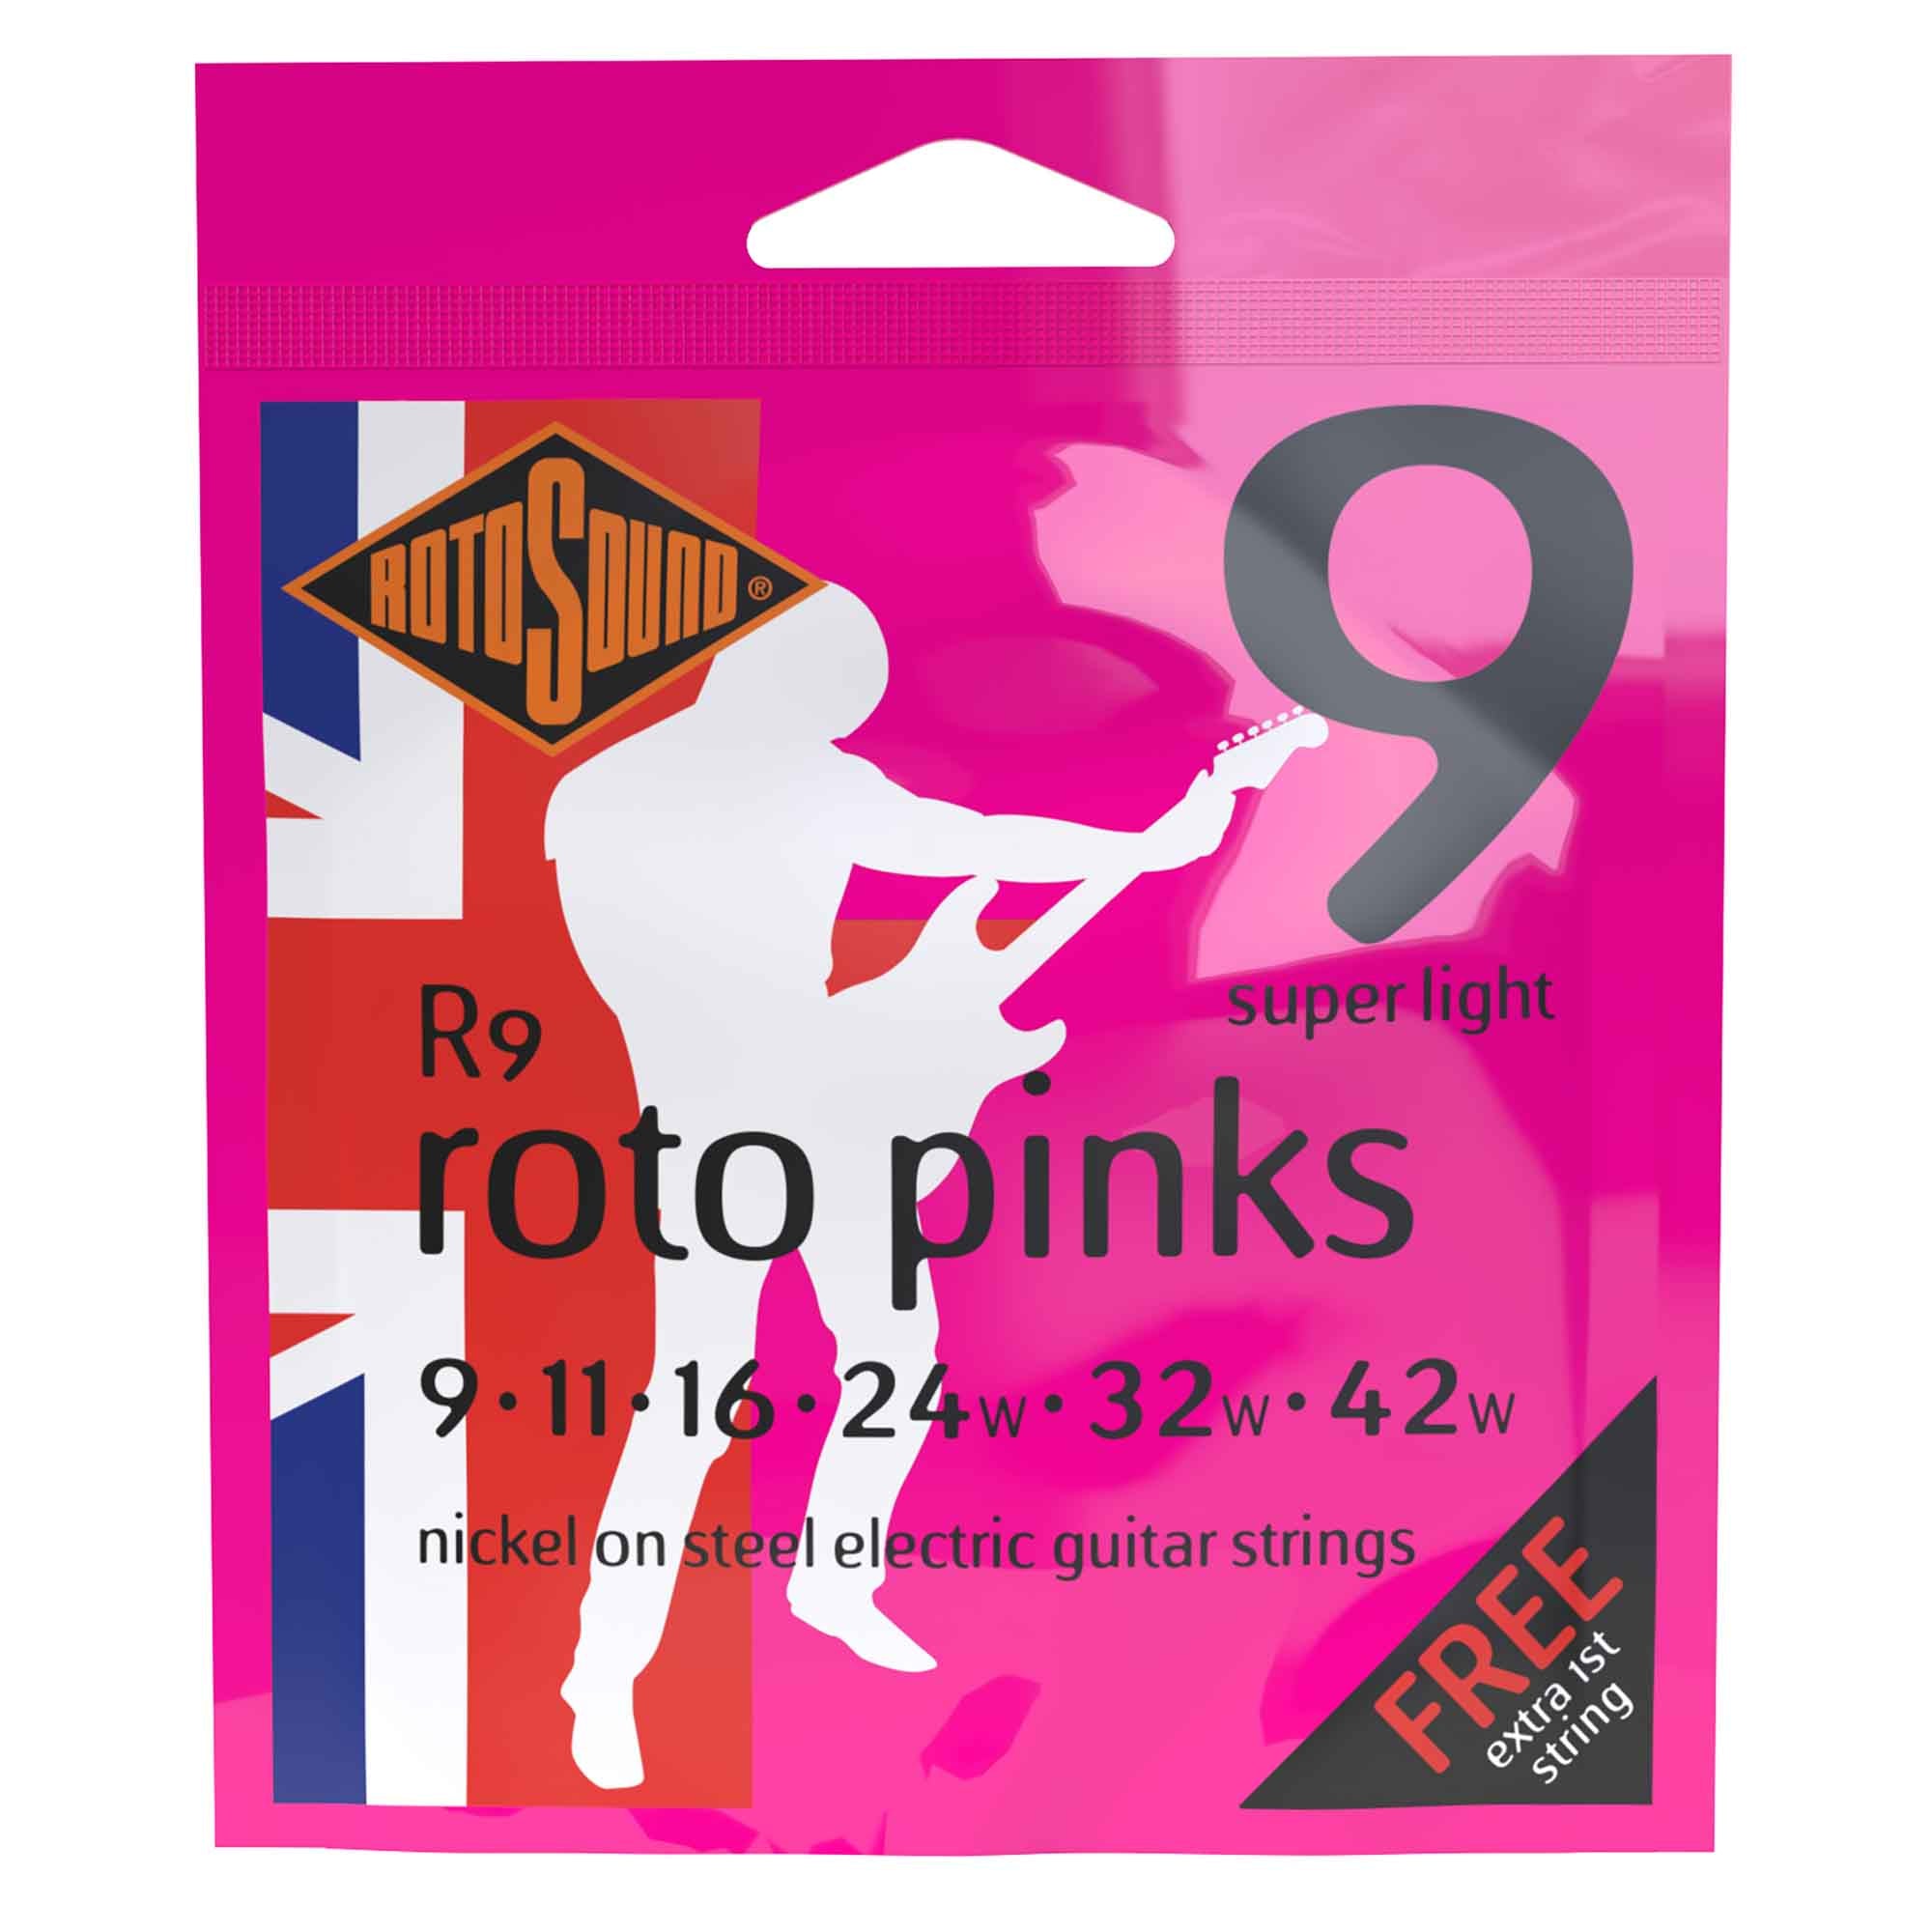 Rotosound R9 ROTO Pinks Nickel Wound 9-42 Electric Guitar Strings, Light